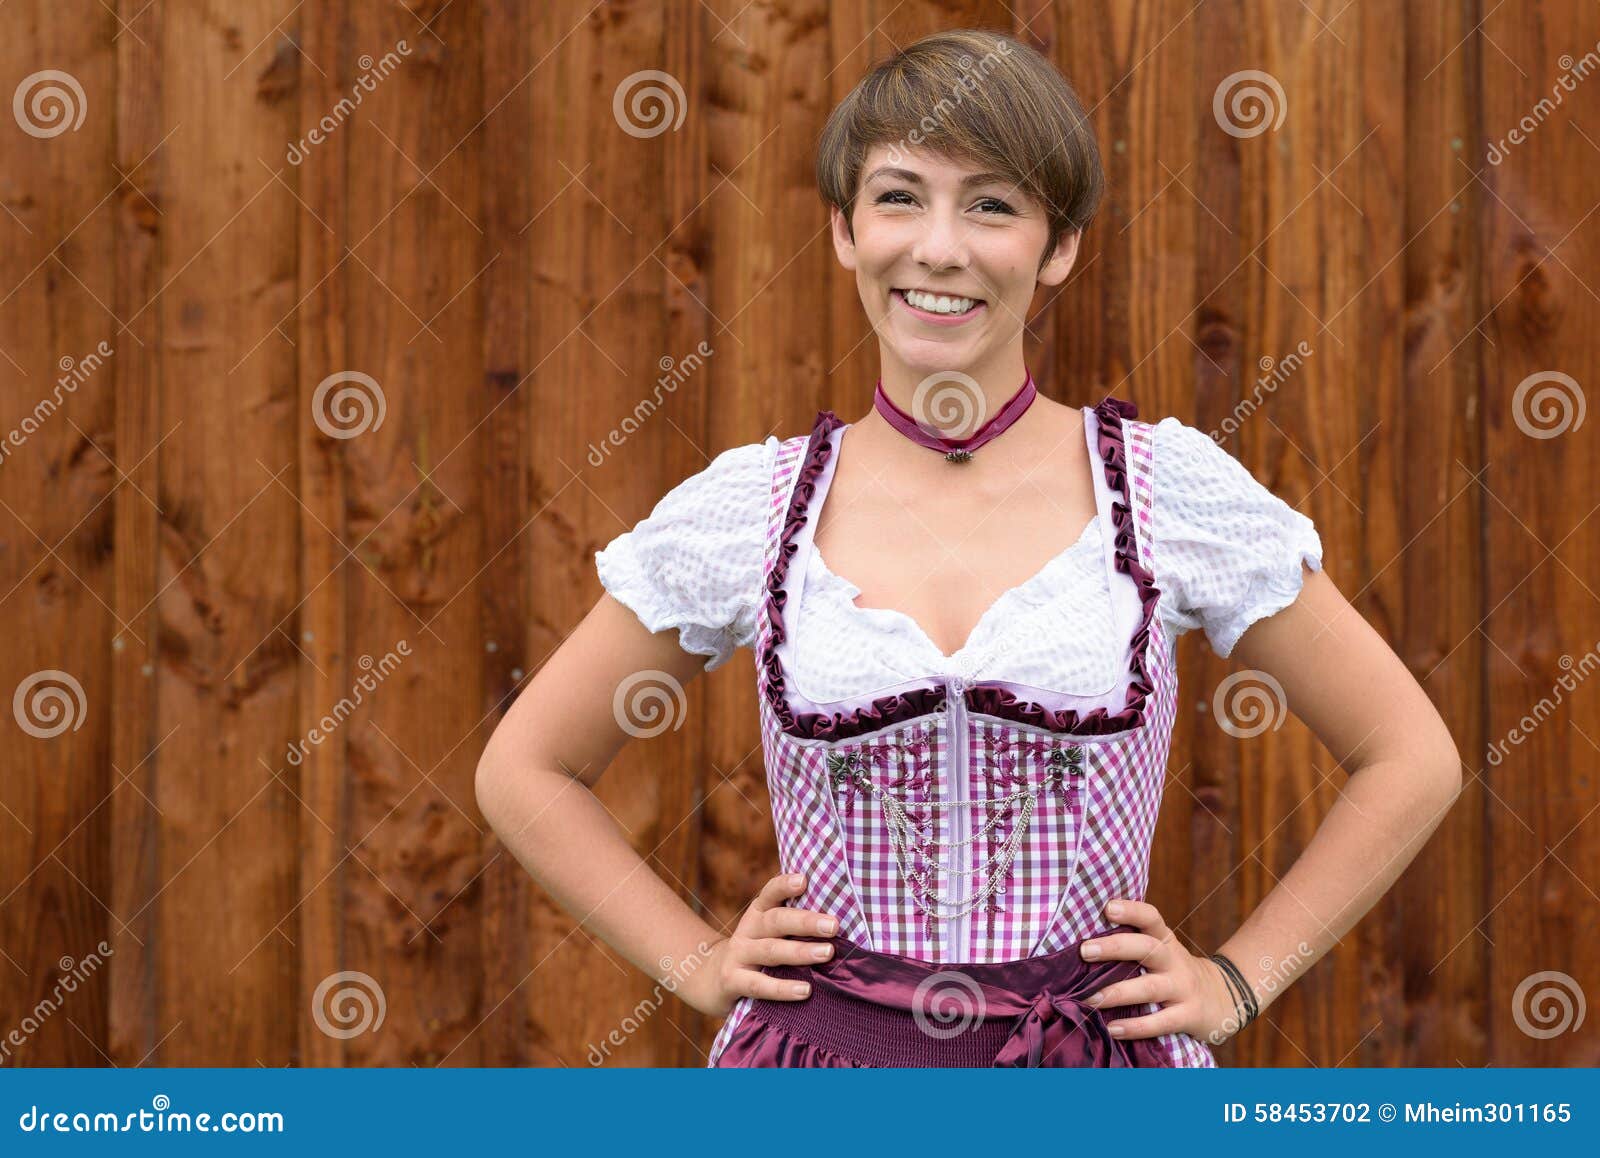 Smiling Confident German Lady Wearing a Dirndl Stock Photo - Image of ...